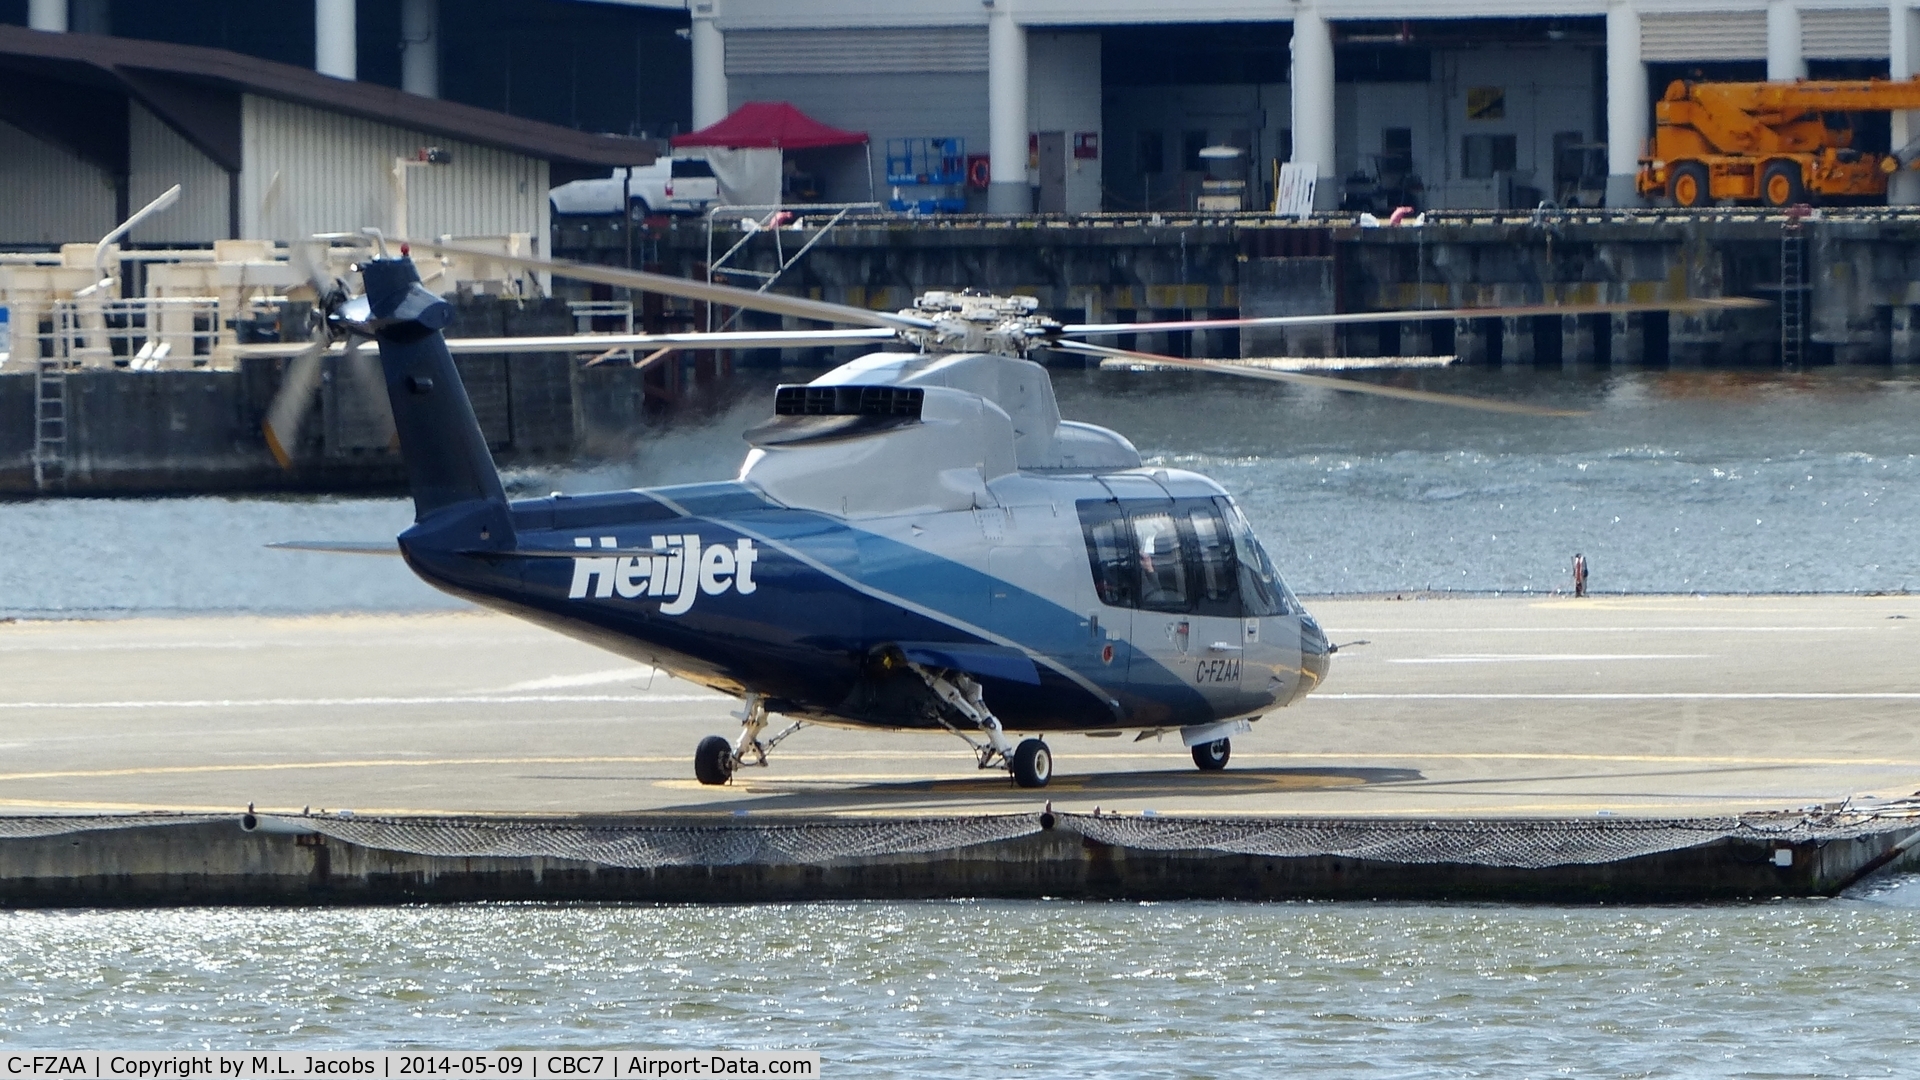 C-FZAA, 1980 Sikorsky S-76A C/N 76-0043, Helijet nearing departure from Vancouver Harbour Heliport.